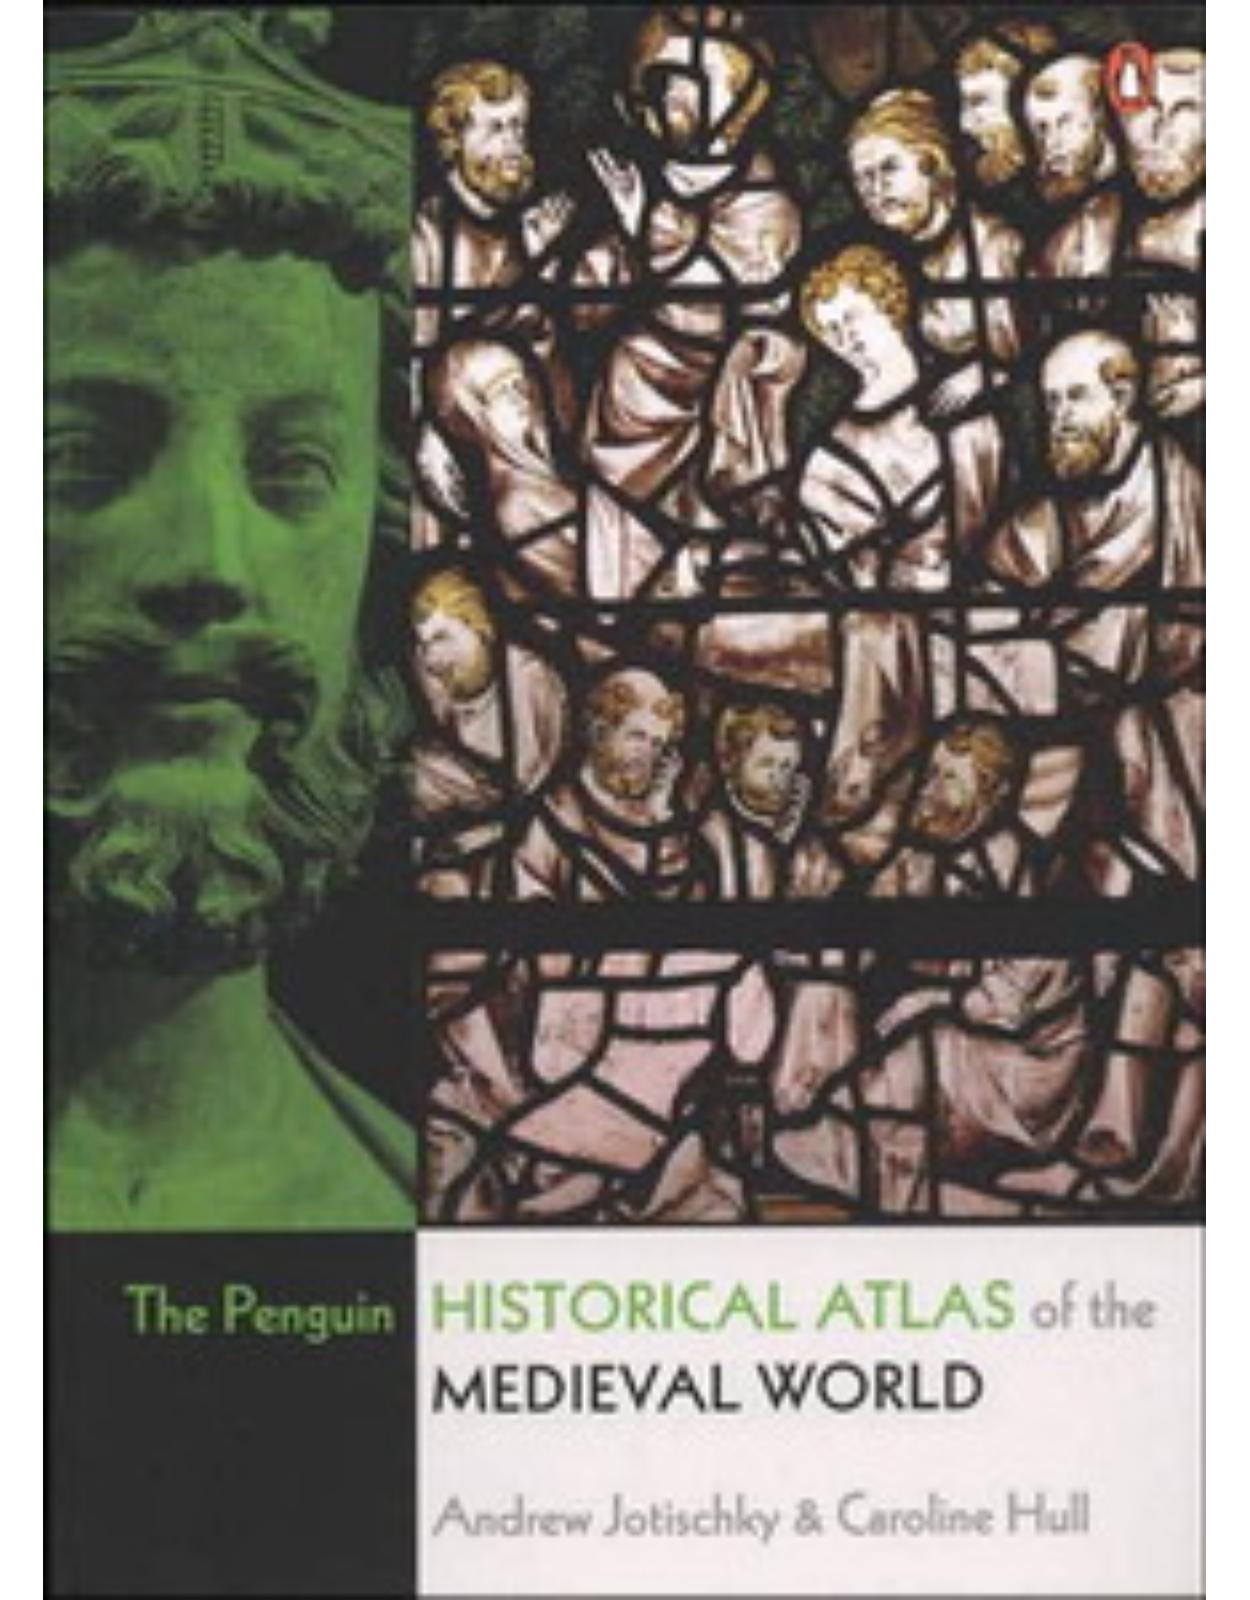 Historical Atlas of the Medieval World